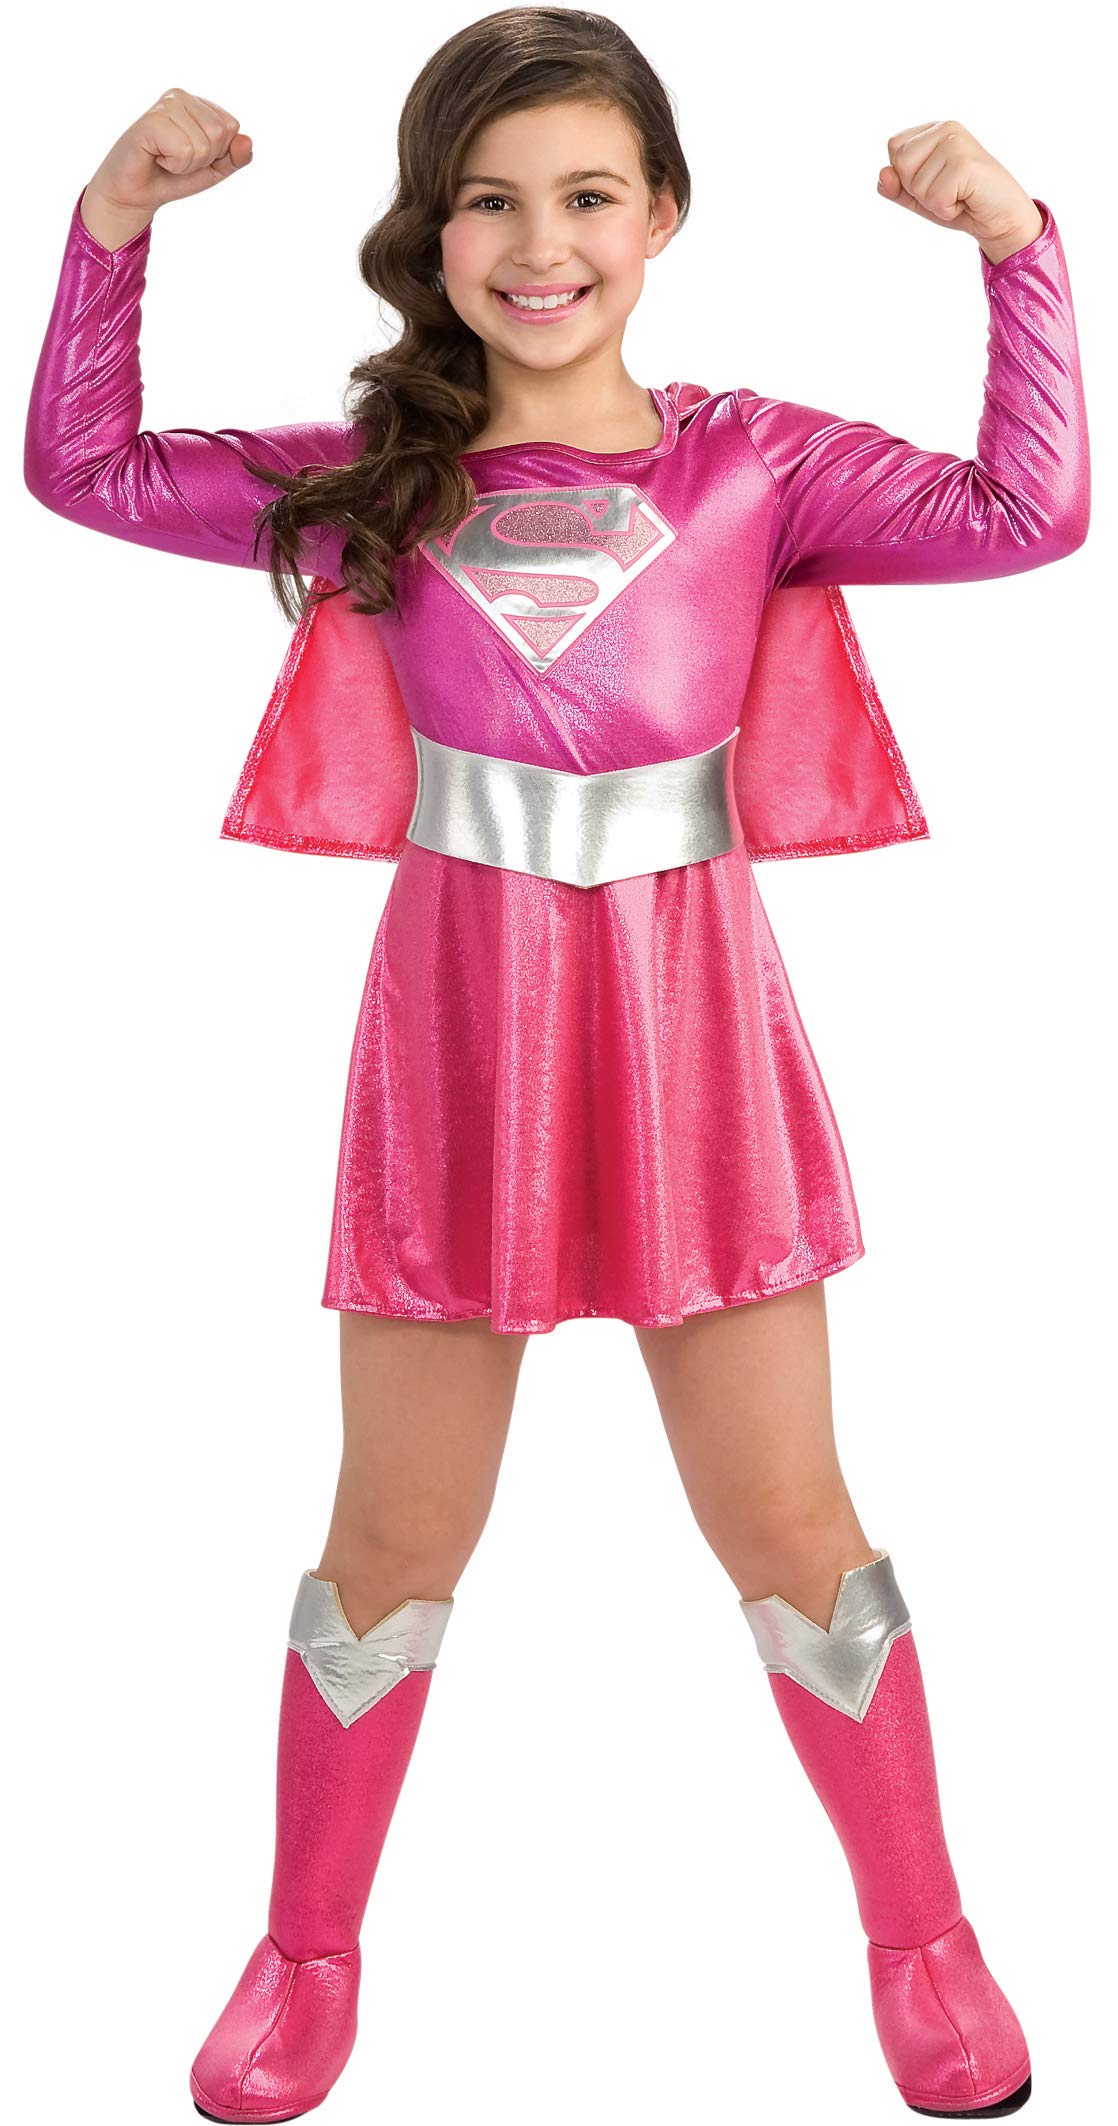 Rubie's Child's Pink Supergirl Child's Costume, Small, Pink/silver